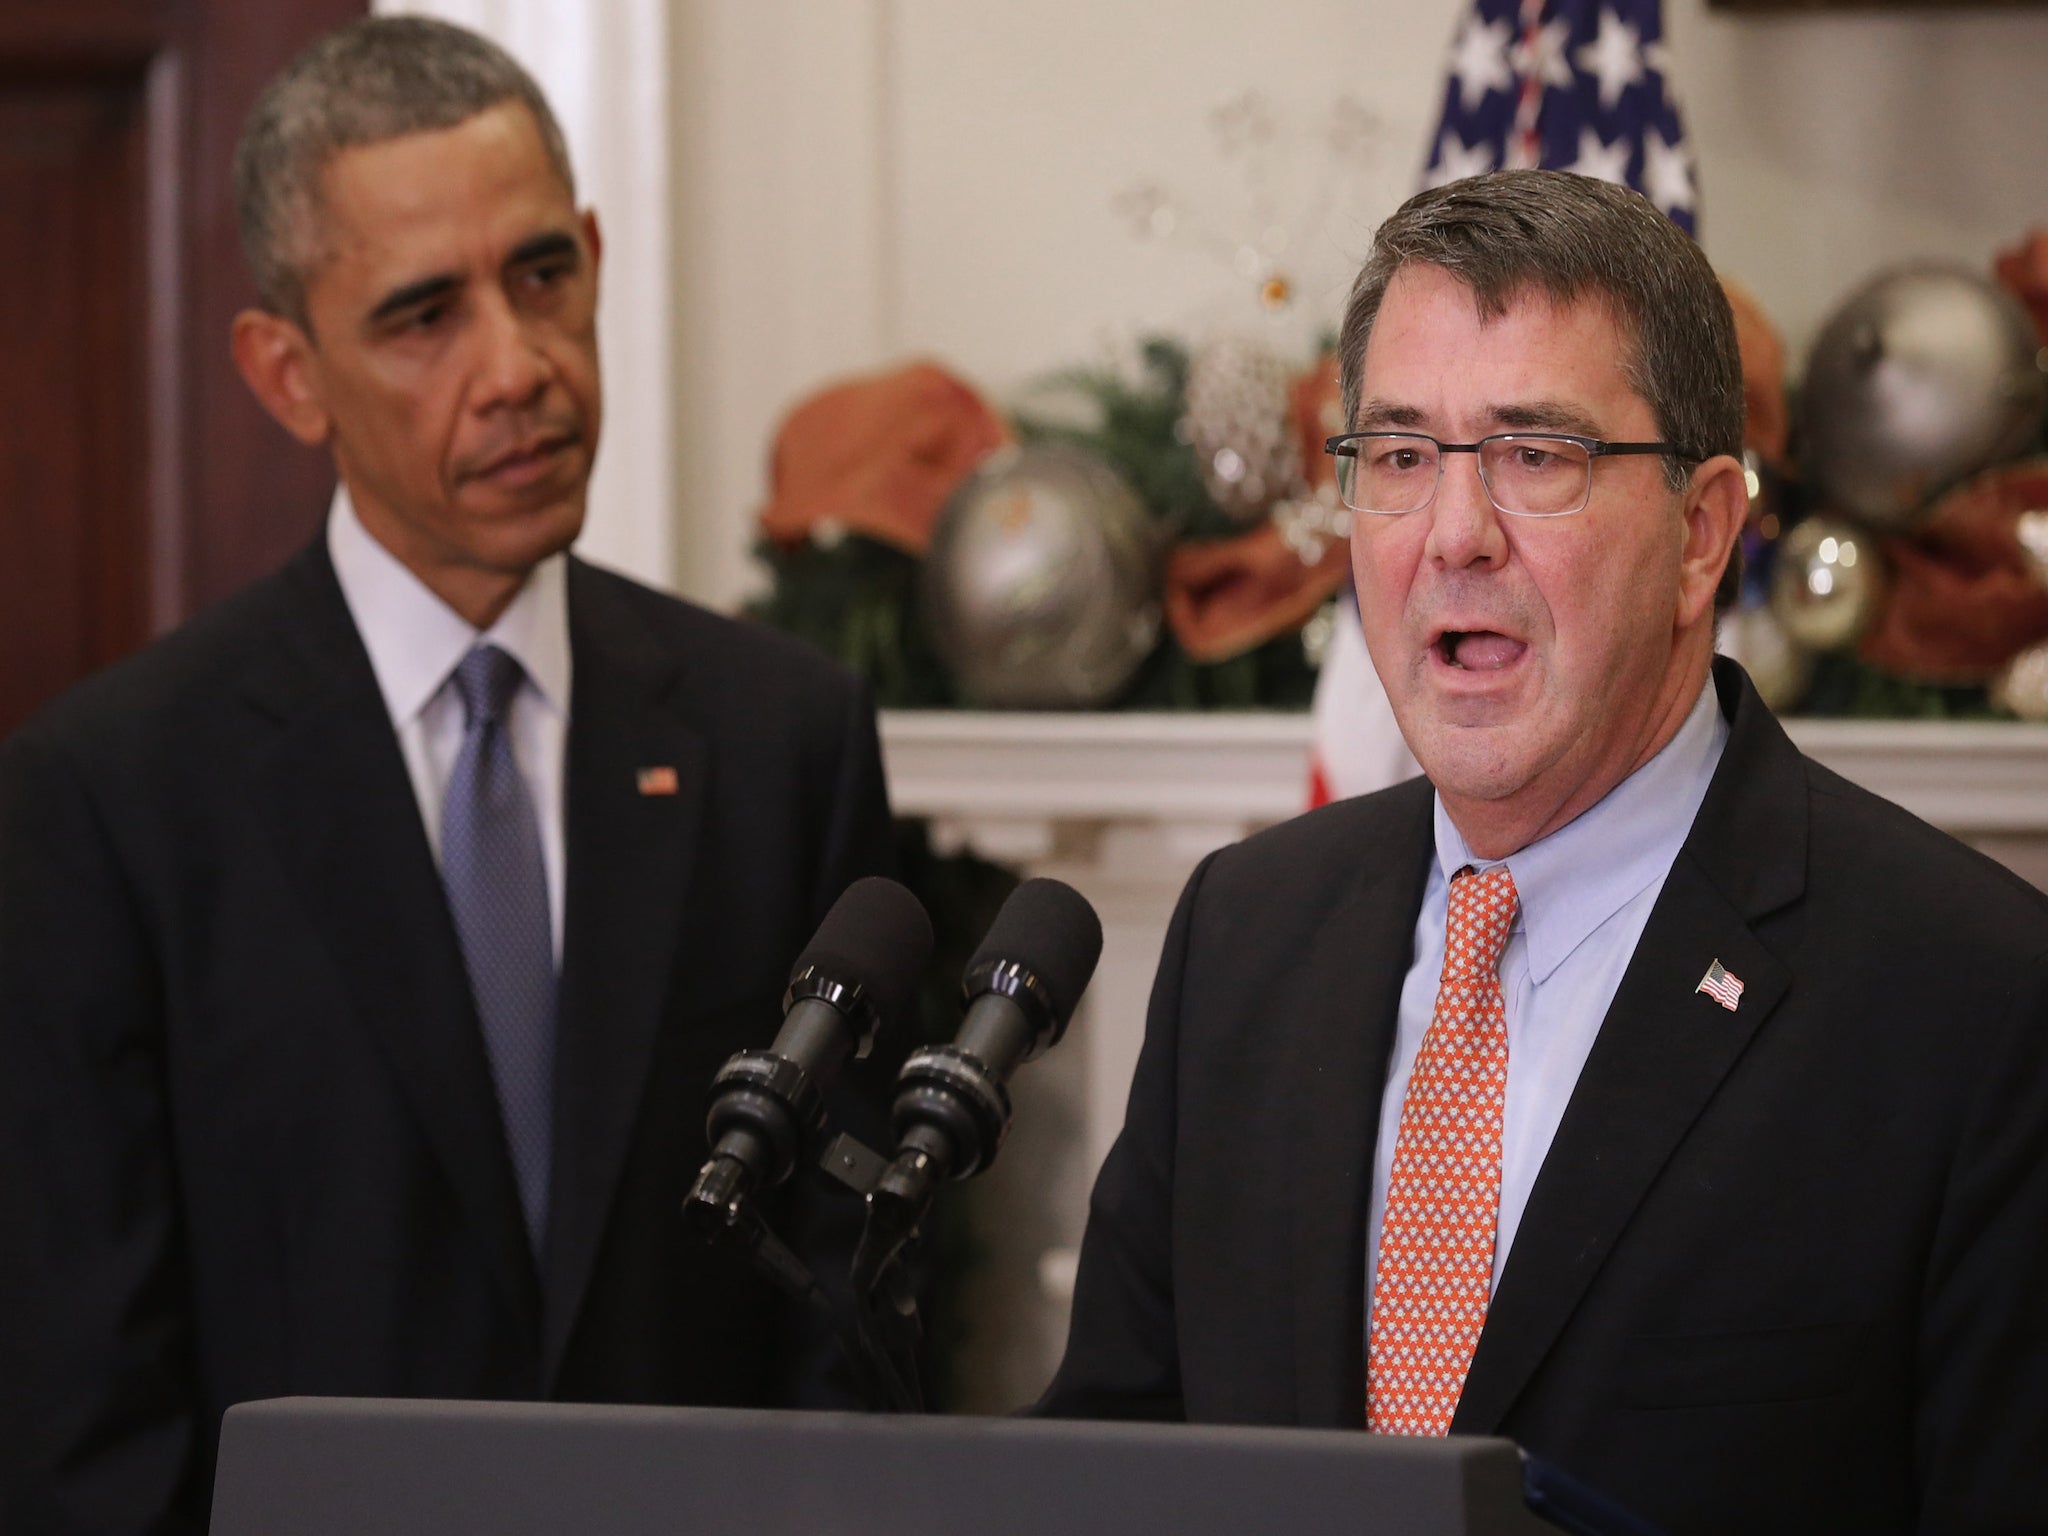 Ashton Carter had been widely expected to be confirmed as Barack Obama's fourth Defence Secretary